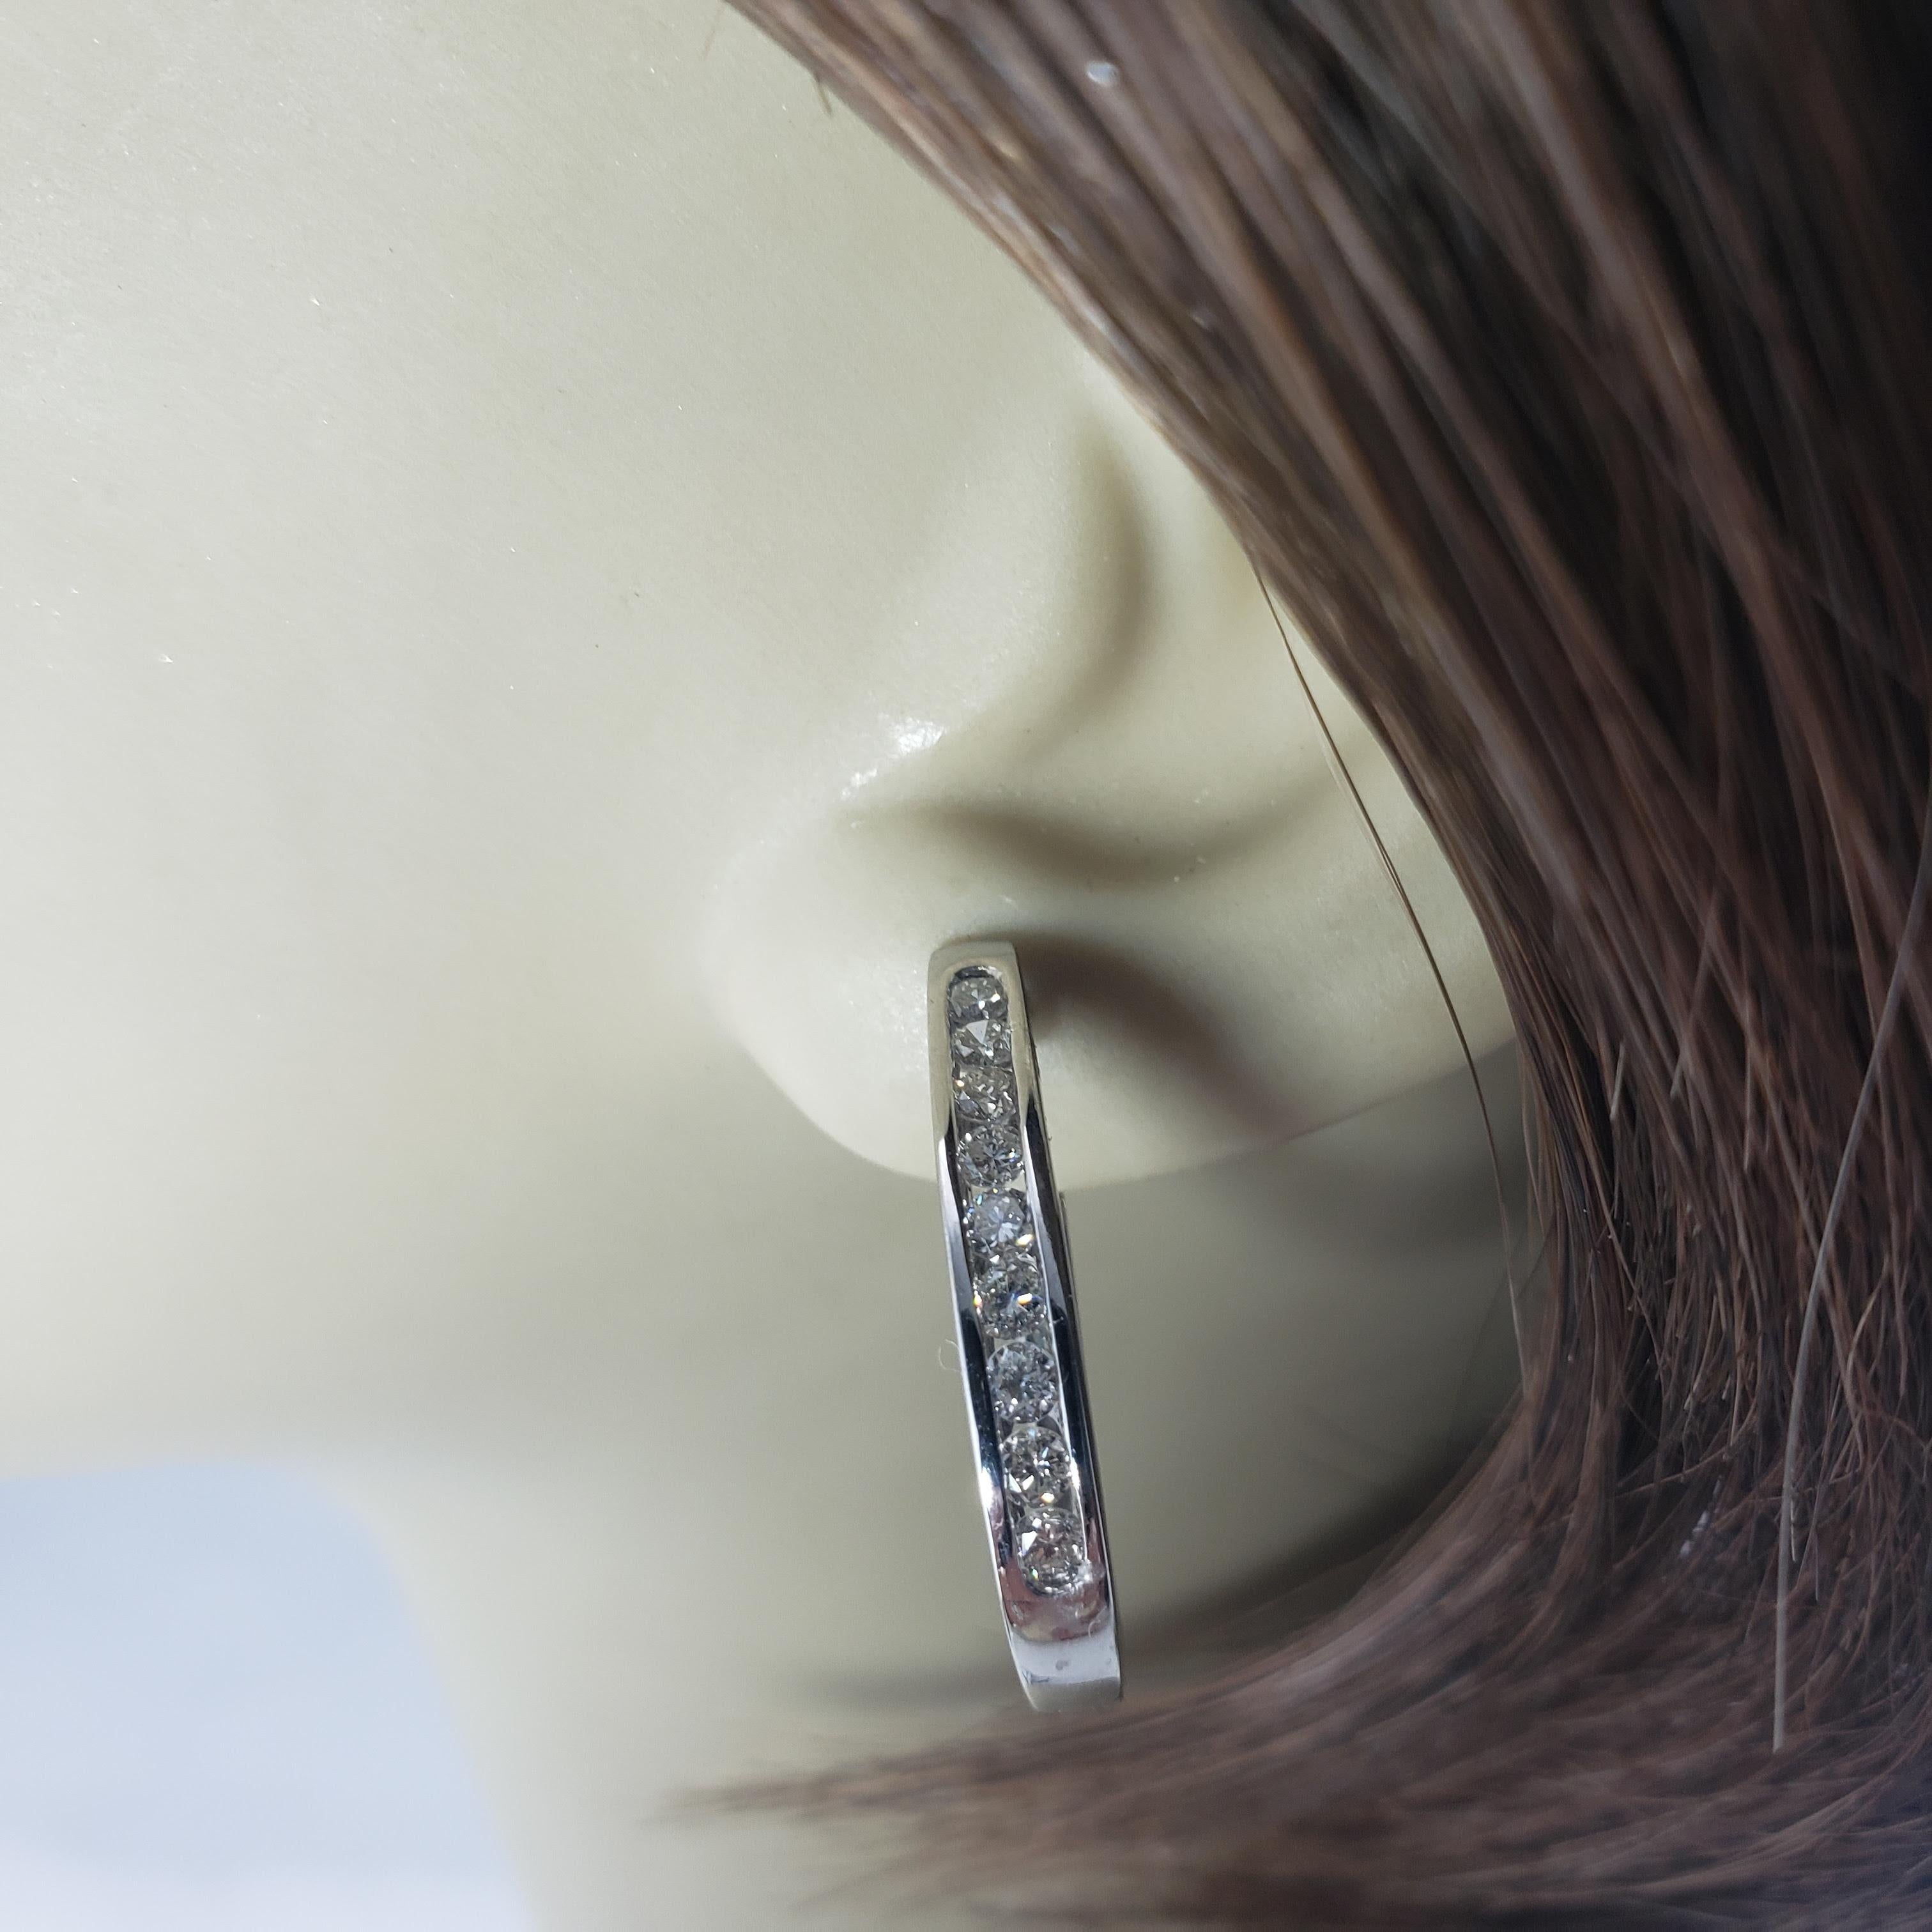 Vintage 14 Karat White Gold Diamond Hoop Earrings-

These sparkling hinged hoop earrings each feature nine round brilliant cut diamonds set in classic 14K white gold.

Approximate total diamond weight: .72 ct.

Diamond color: I-K

Diamond clarity: